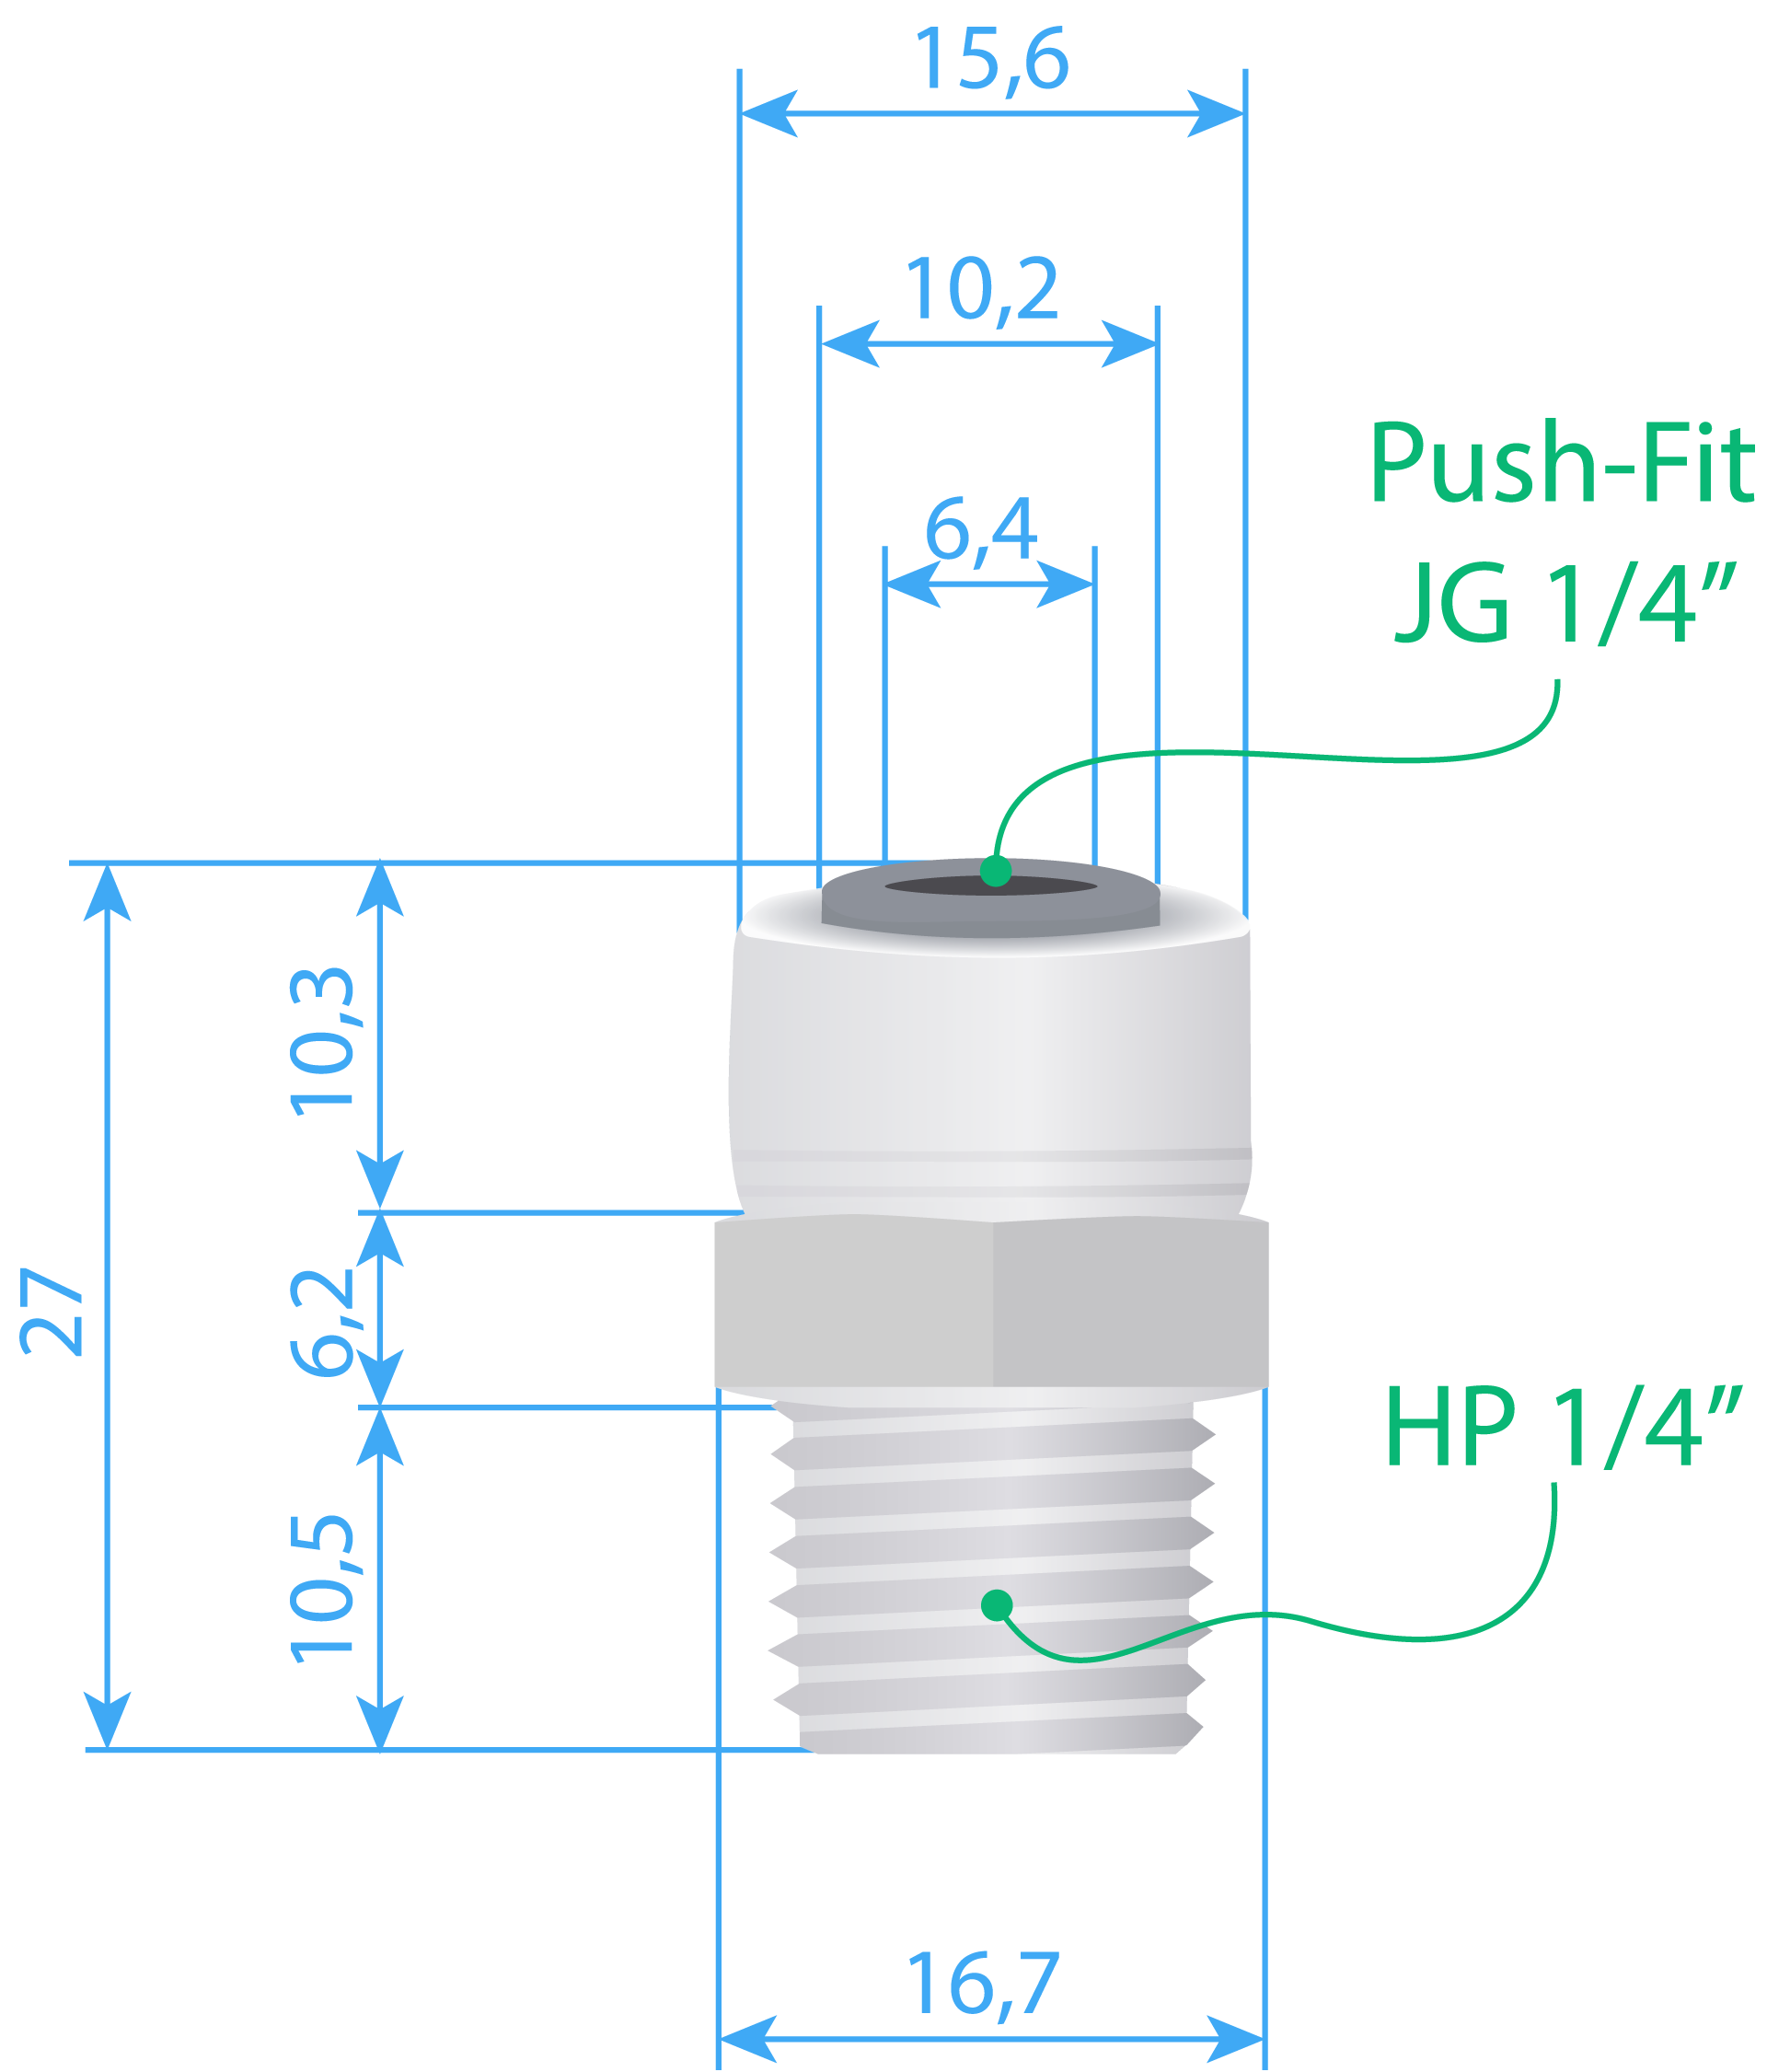 Connector Type-I (PF JG 1/4” – Thead Male 1/4”) Dimensions